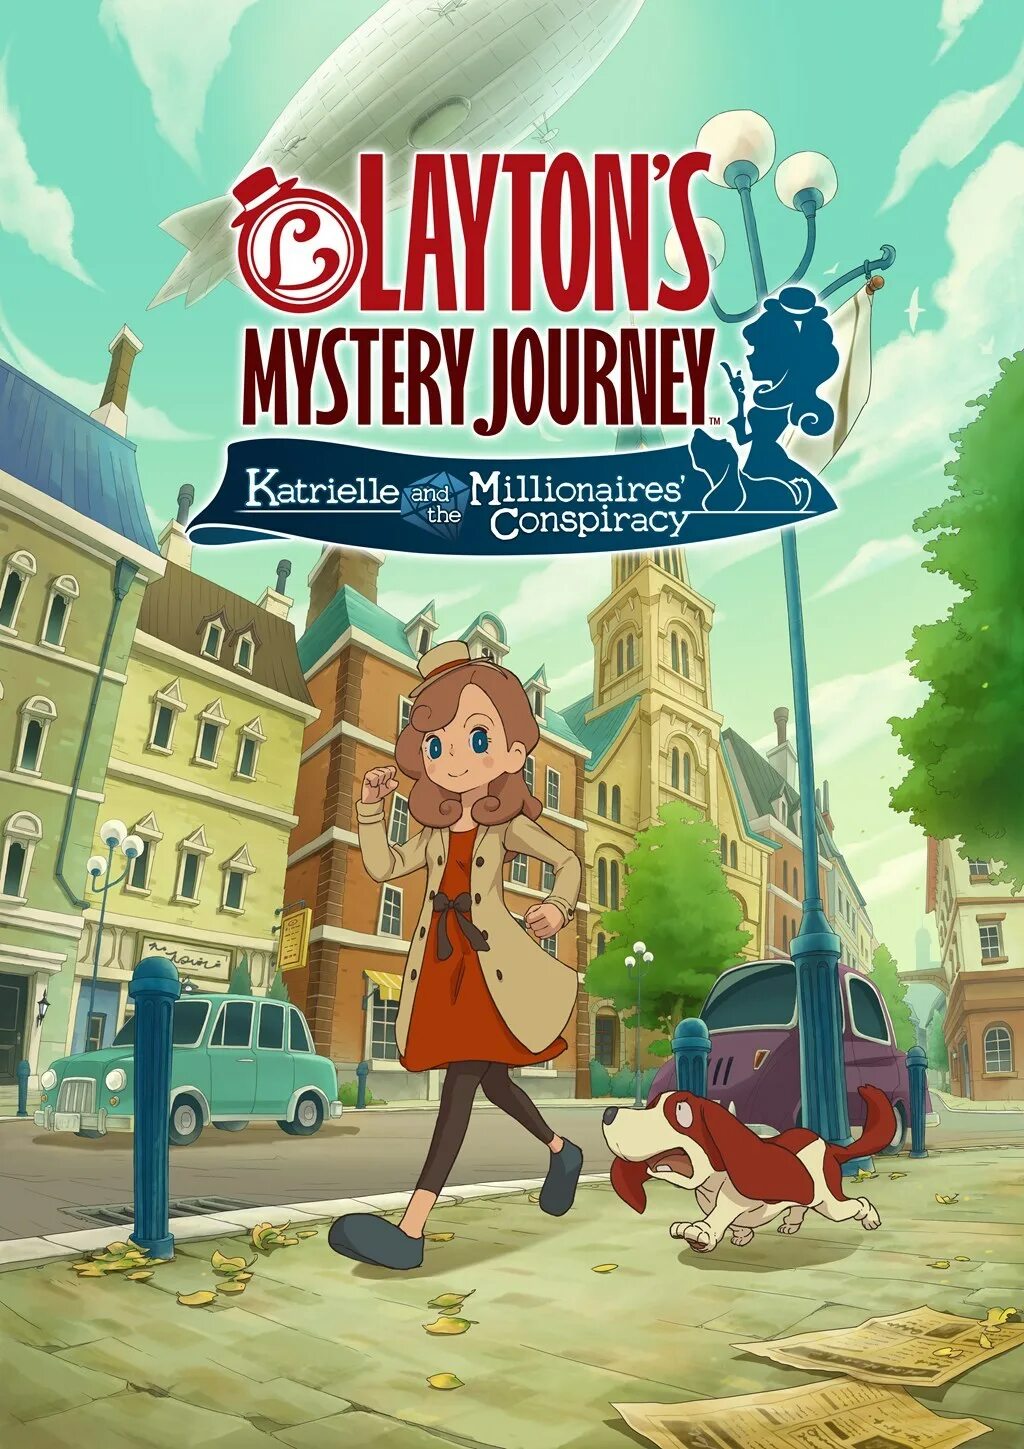 Mystery journey. Layton's Mystery Journey: Katrielle and the Millionaires' Conspiracy. Laytons Mystery Journey. Laytons Mystery Journey Katrielle. Layton's Mystery Journey: Katrielle and the Millionaires' Conspiracy - Deluxe (английская версия).